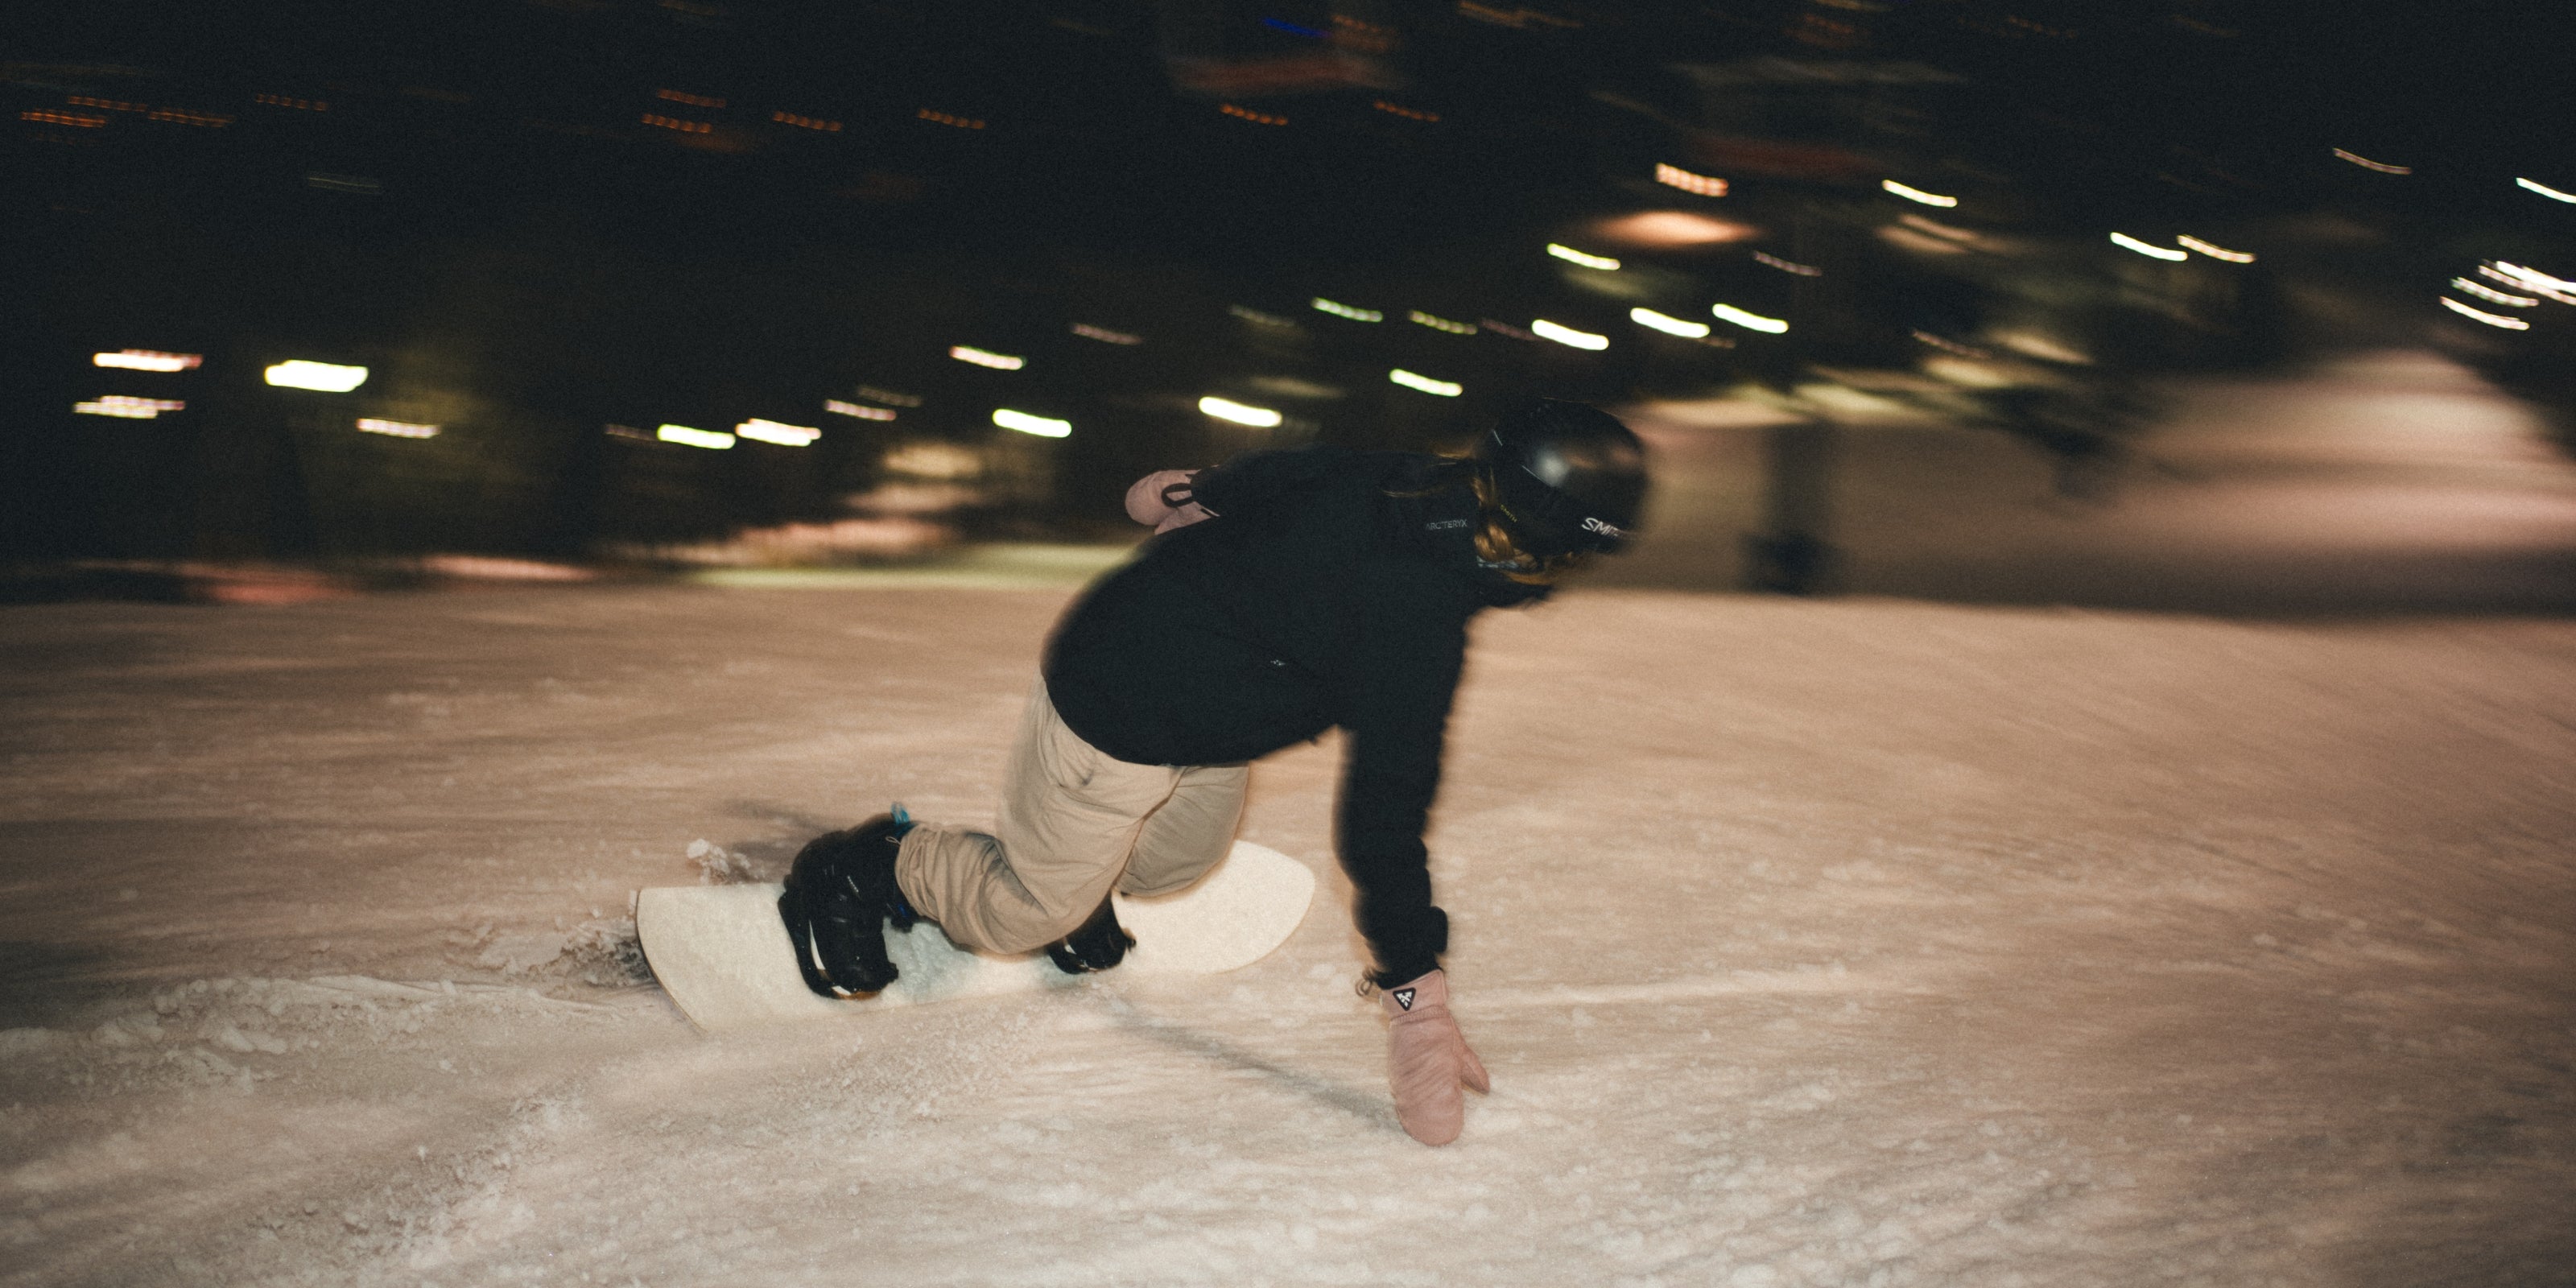 Snowboarder performing a sharp turn on a snowy slope under night lights, featuring Auclair's Powgirl glove collection